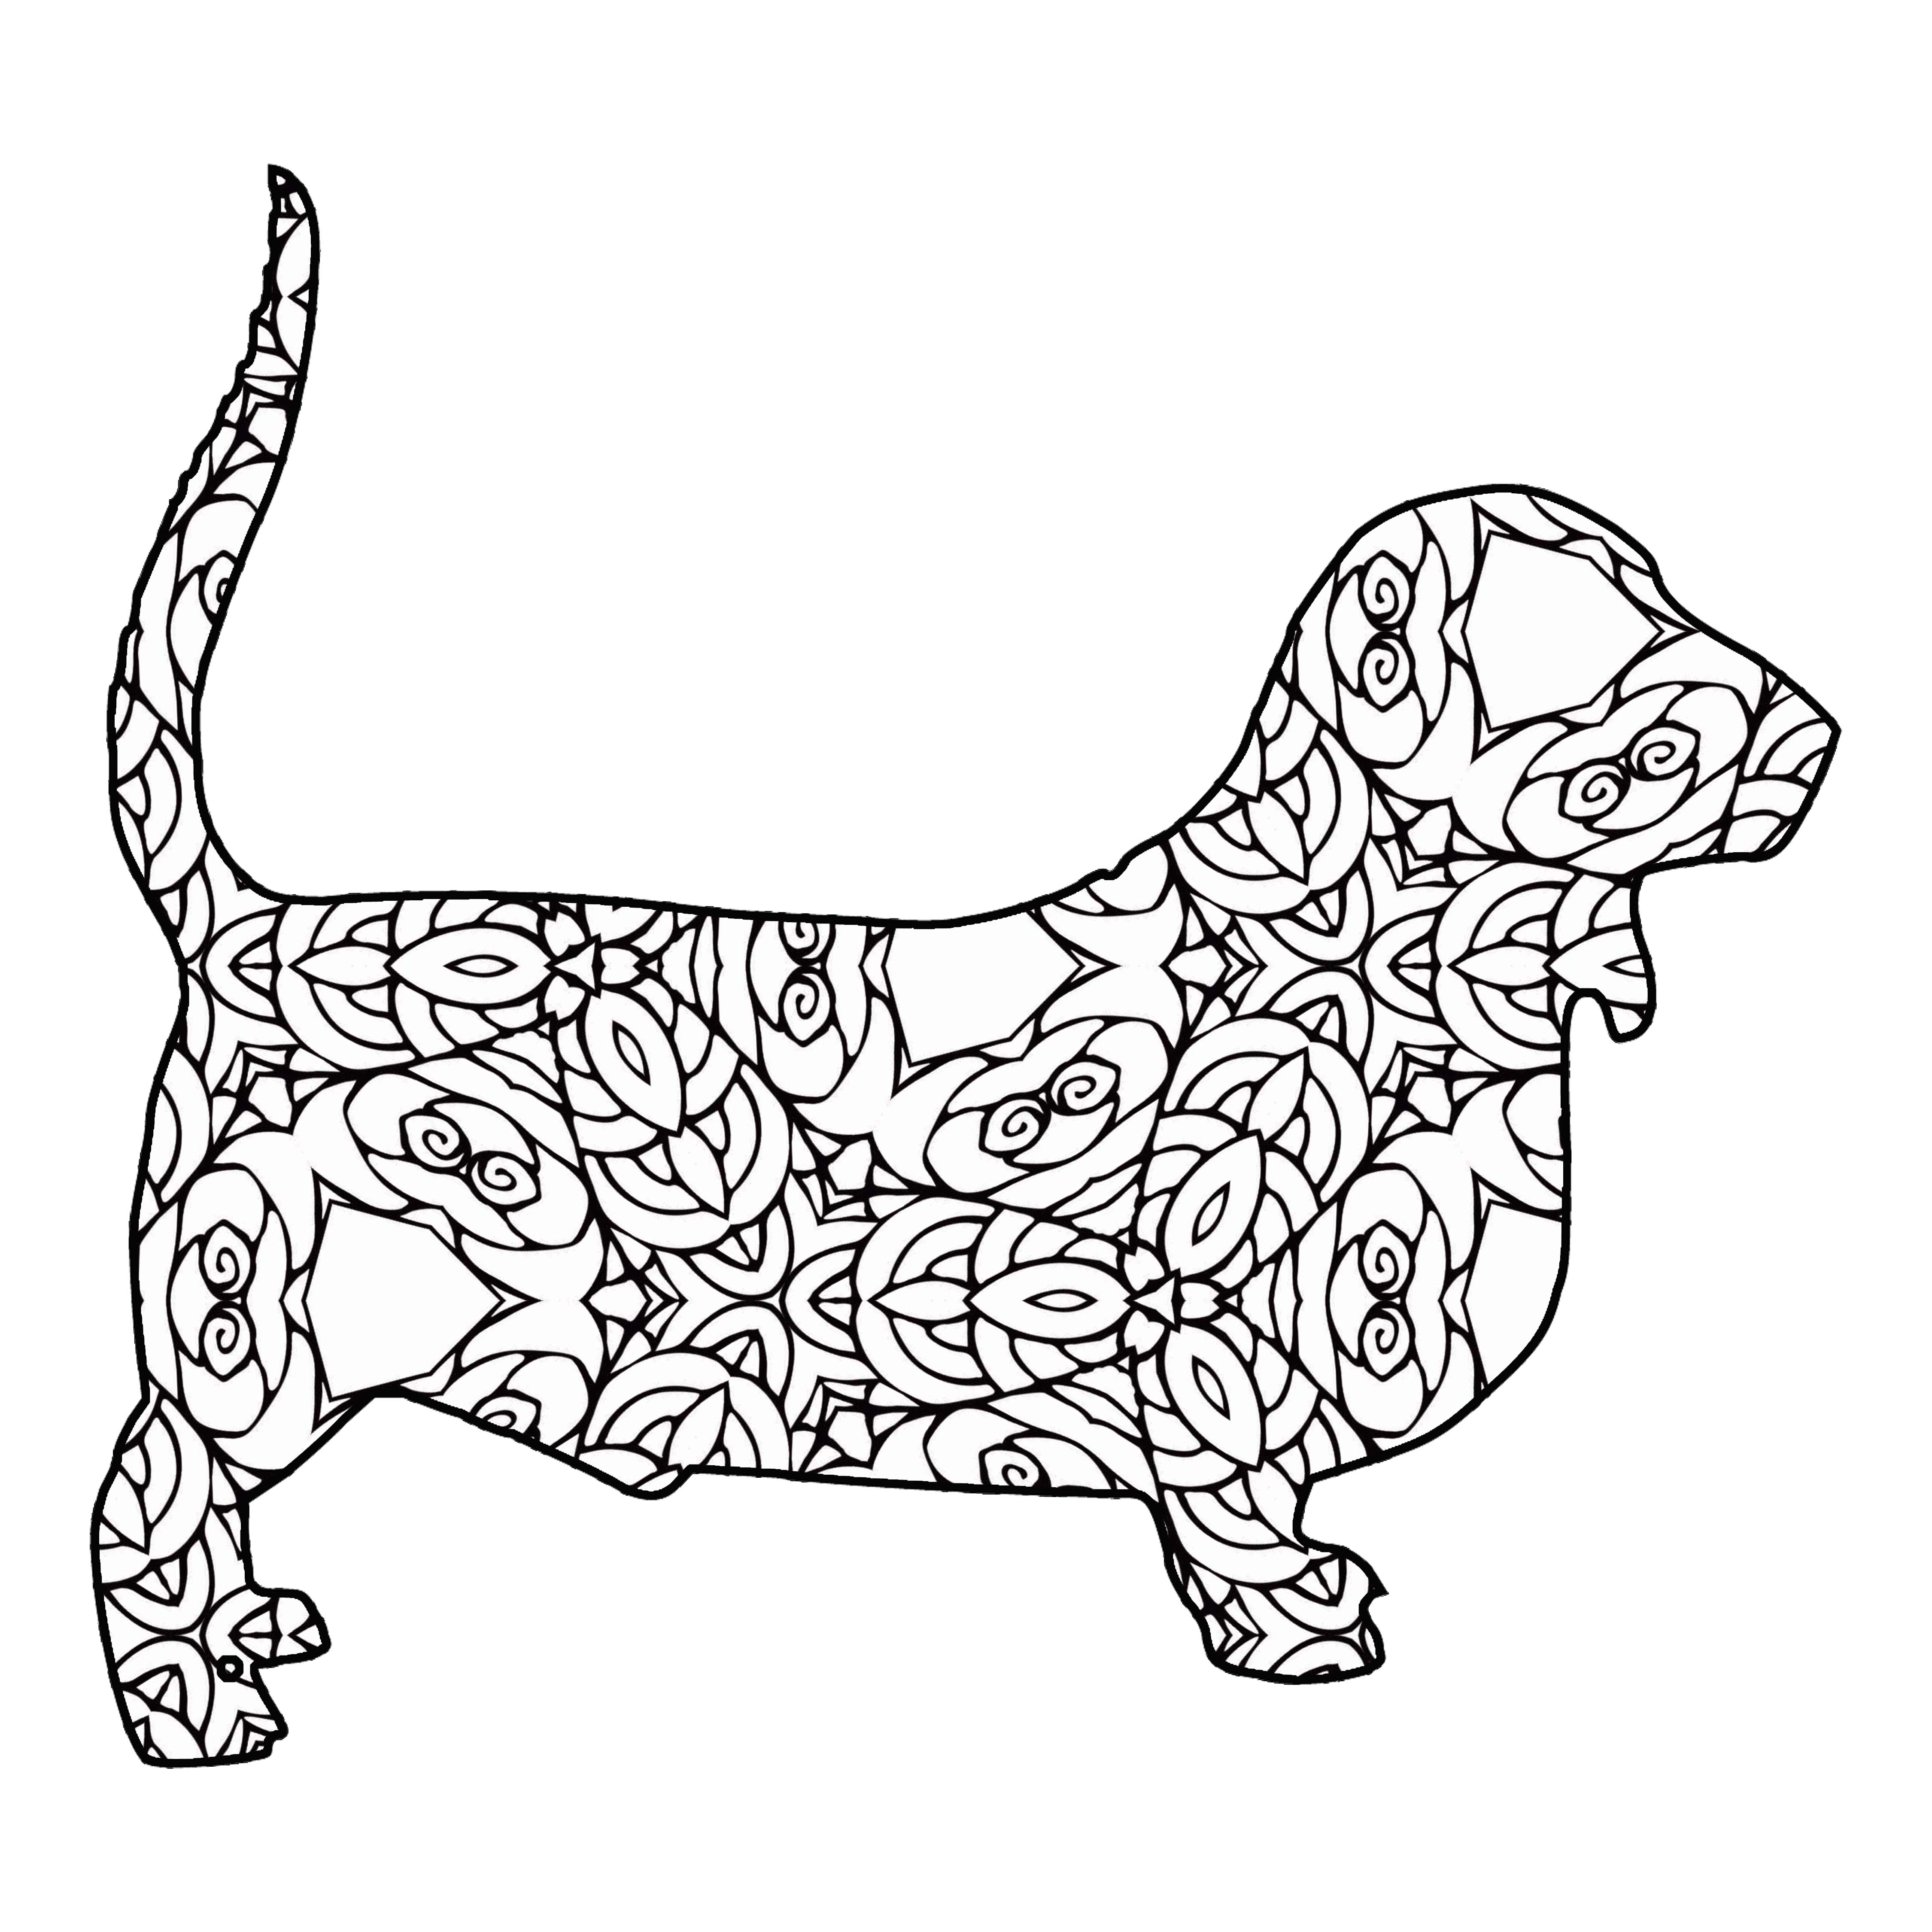 20 Free Printable Geometric Animal Coloring Pages   The Cottage ...